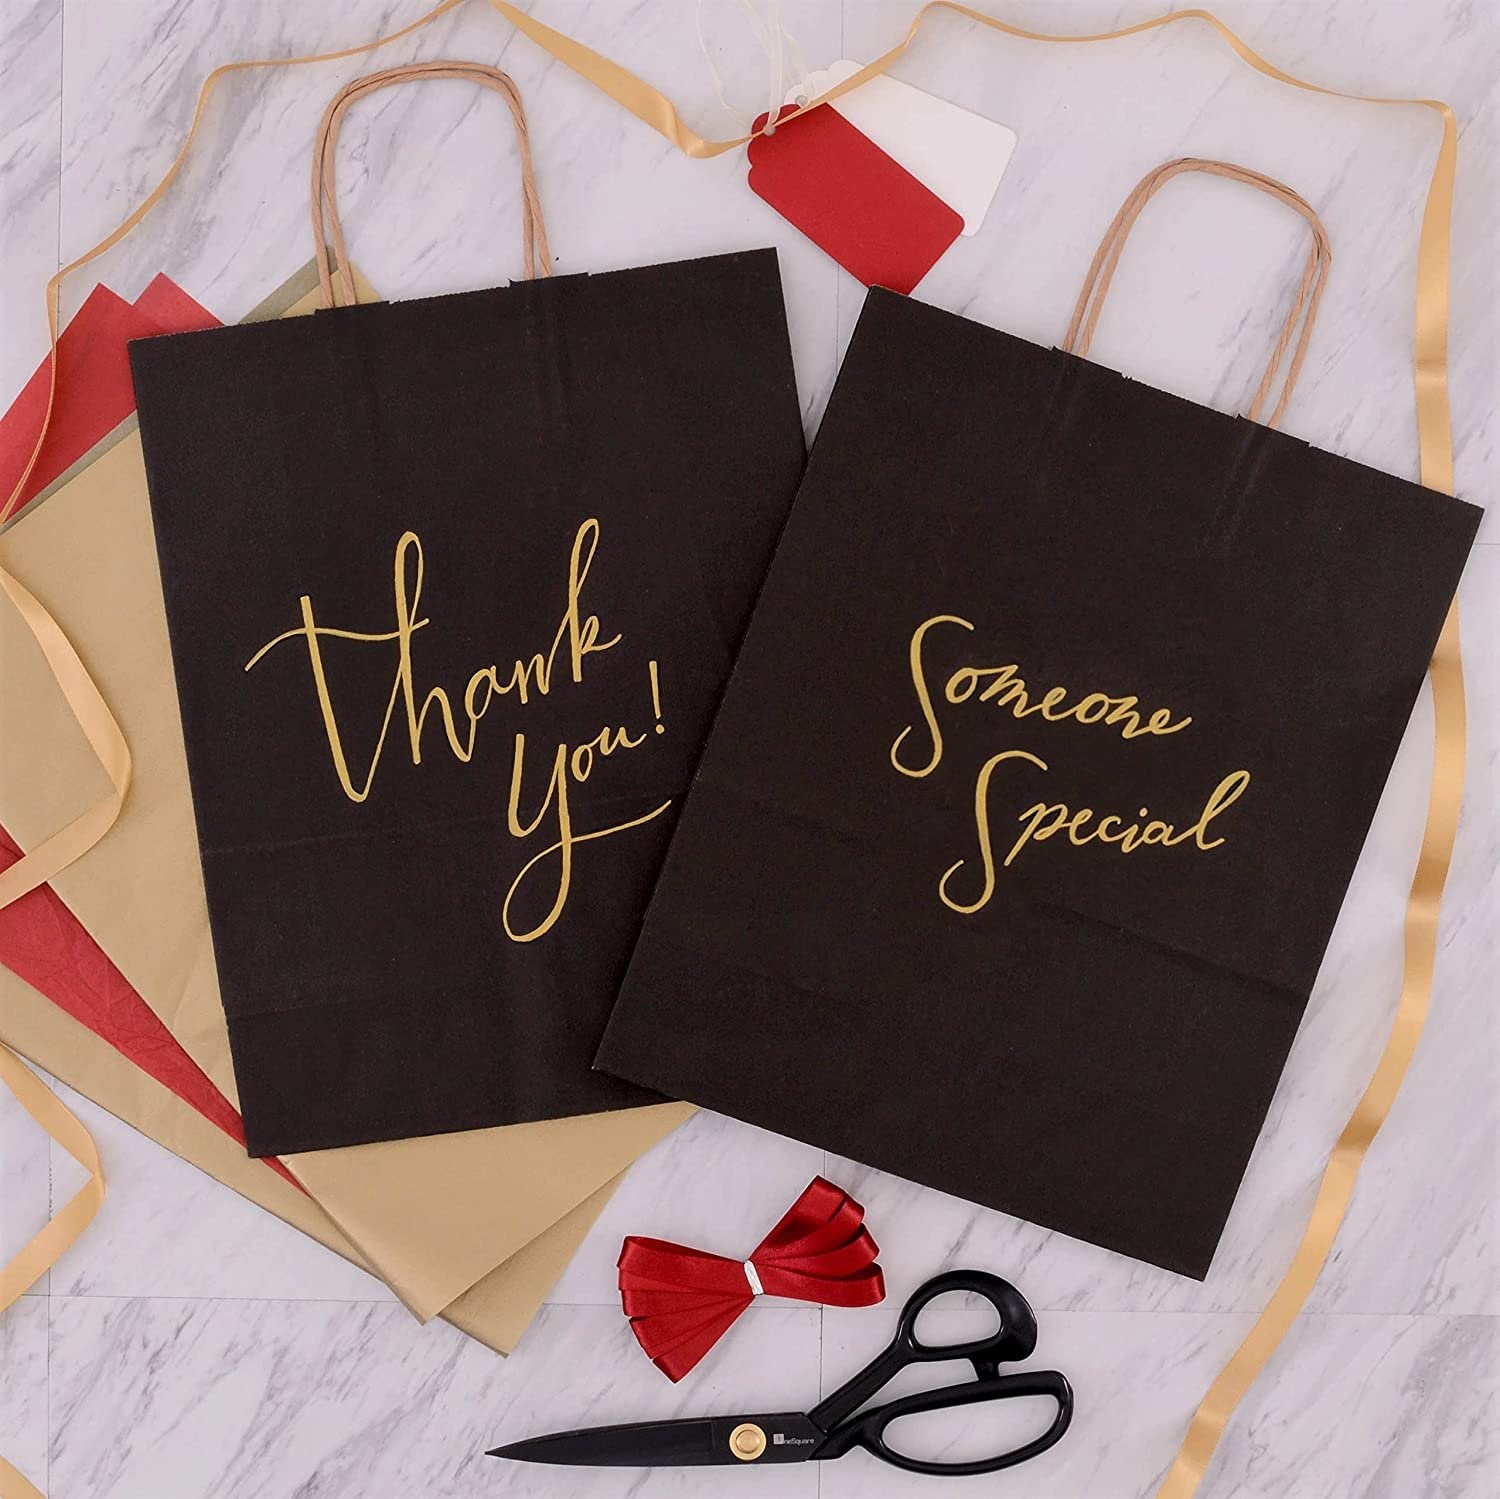 Black Kraft Paper Bags with Reinforced Patch Paper Twist Handles for Birthday Parties, Restaurant Take-Outs, Shopping, Merchandise, Party, Retail, Gift Bags 10x5x13x5"